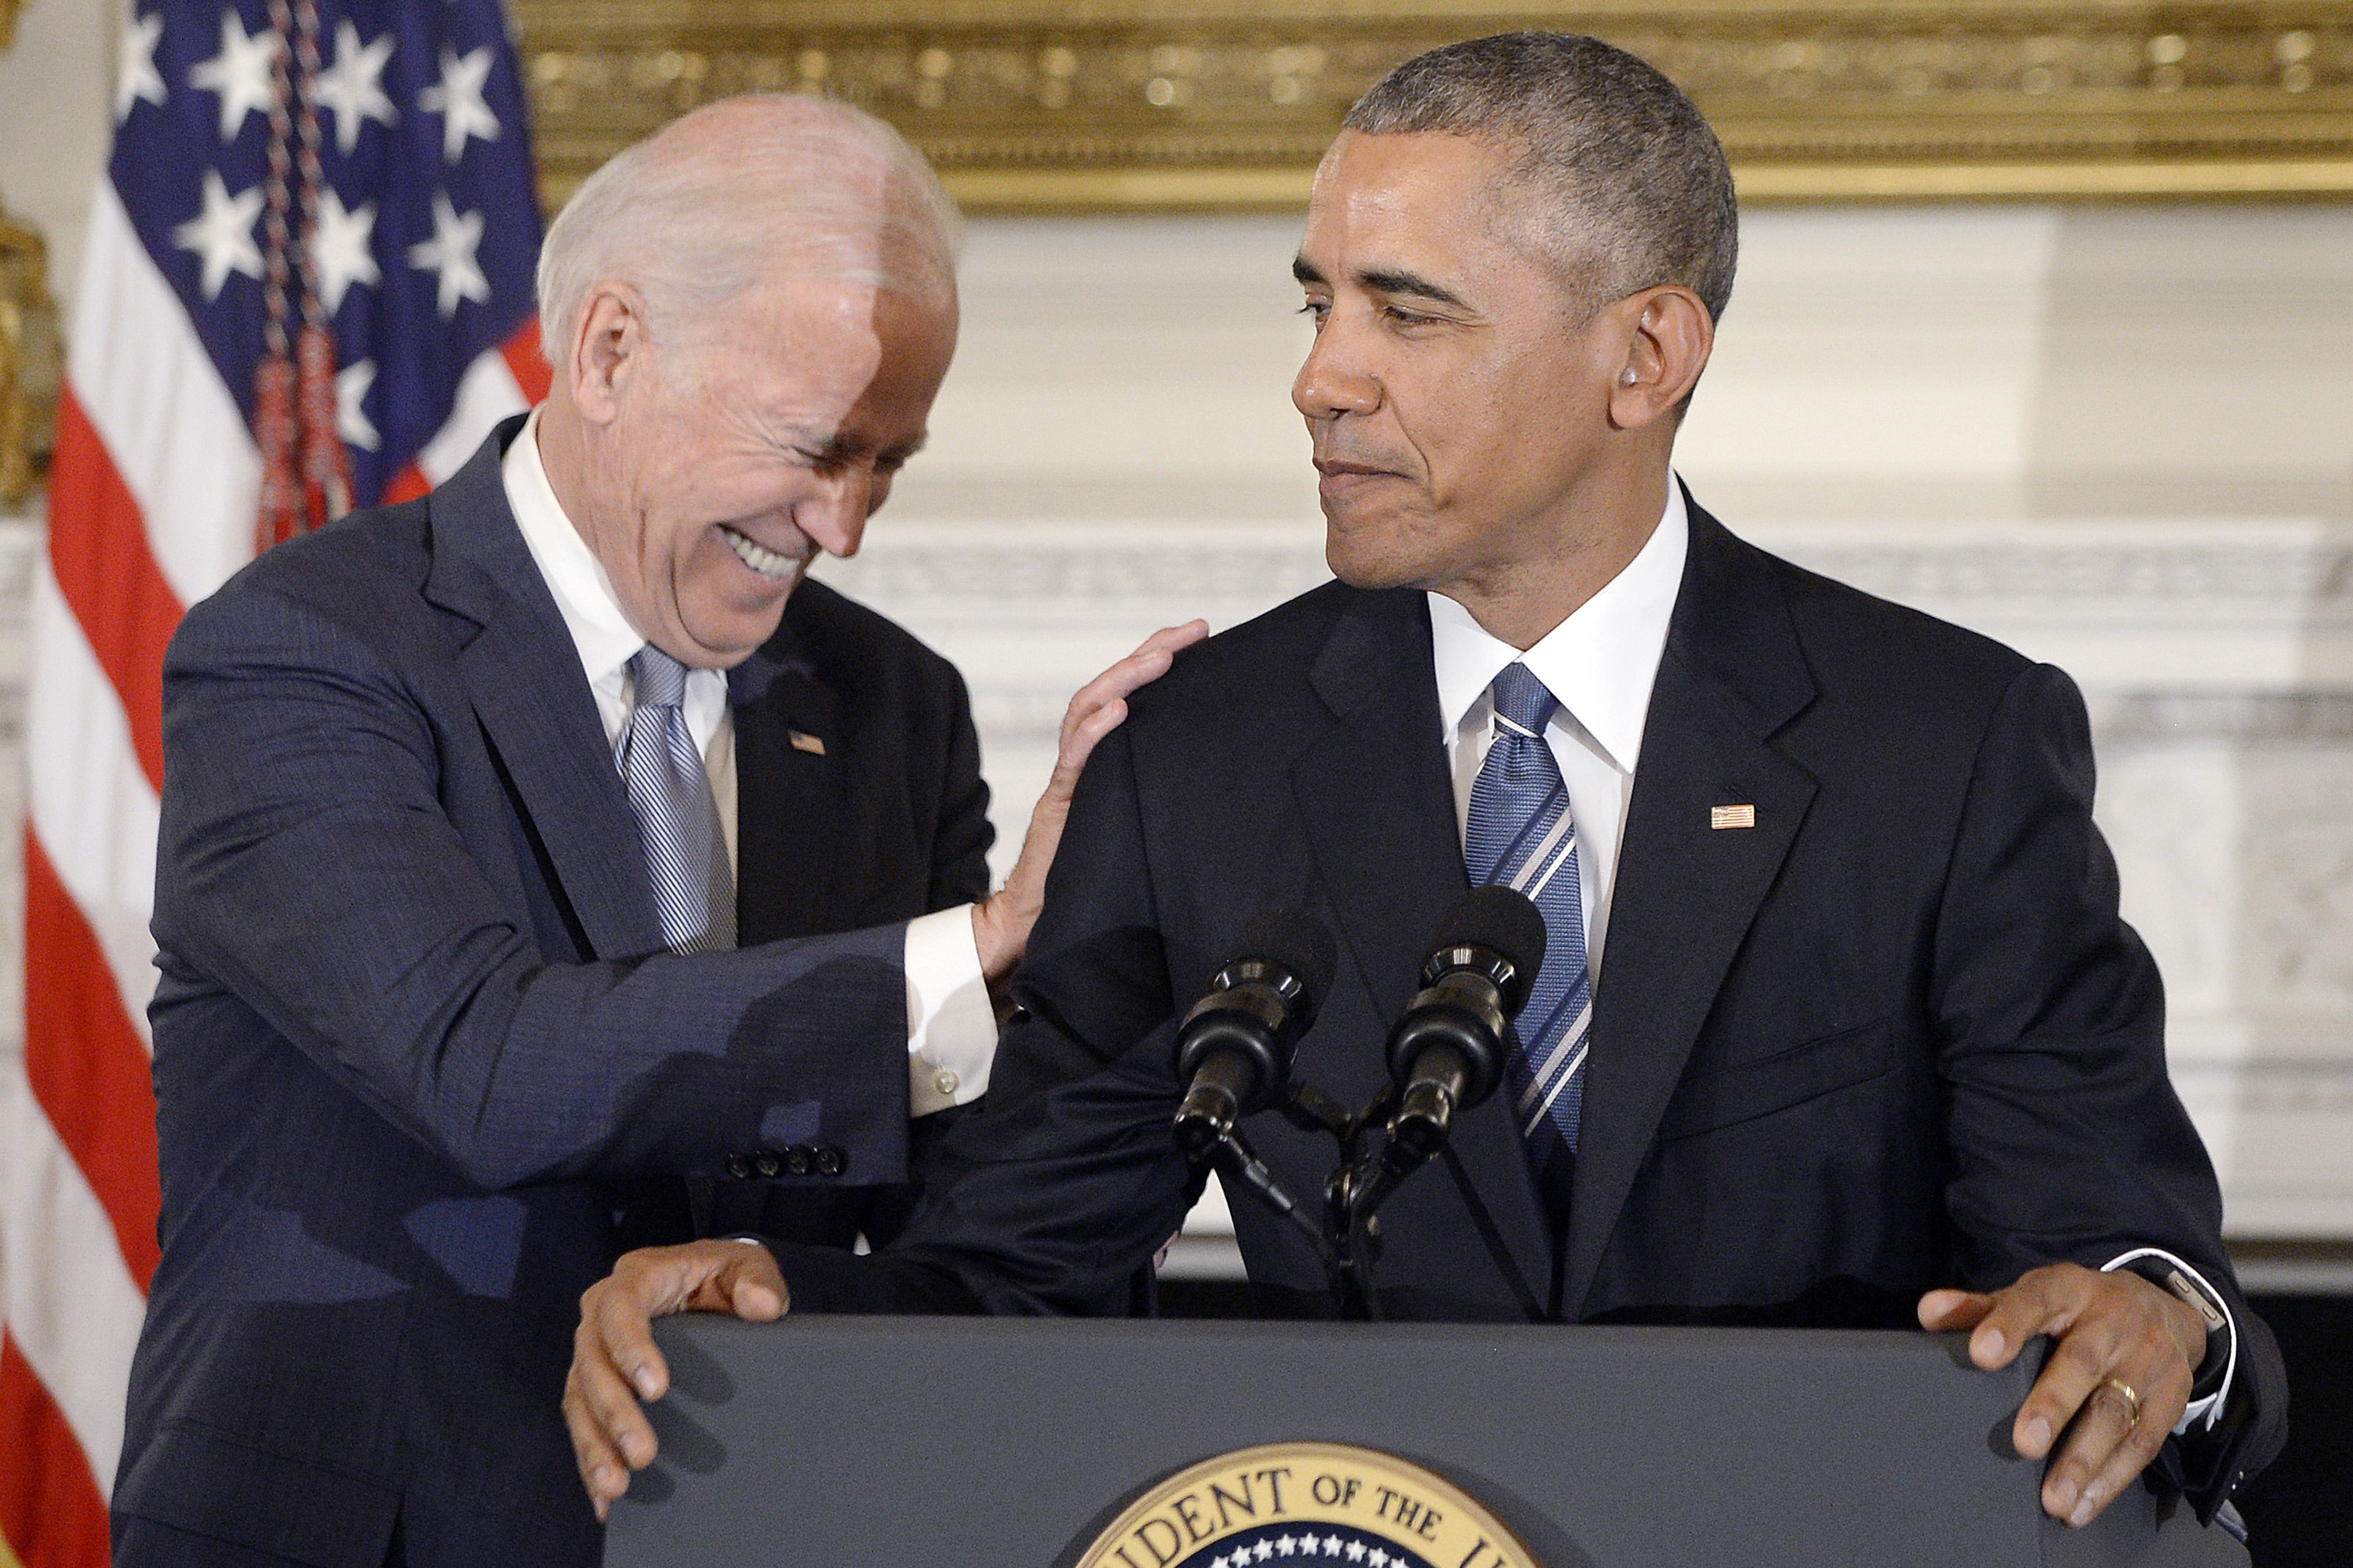 Footage of Barack Obama Surprising Joe Biden Medal of Freedom During DNC Gives Twitter All the Feels | Entertainment Tonight